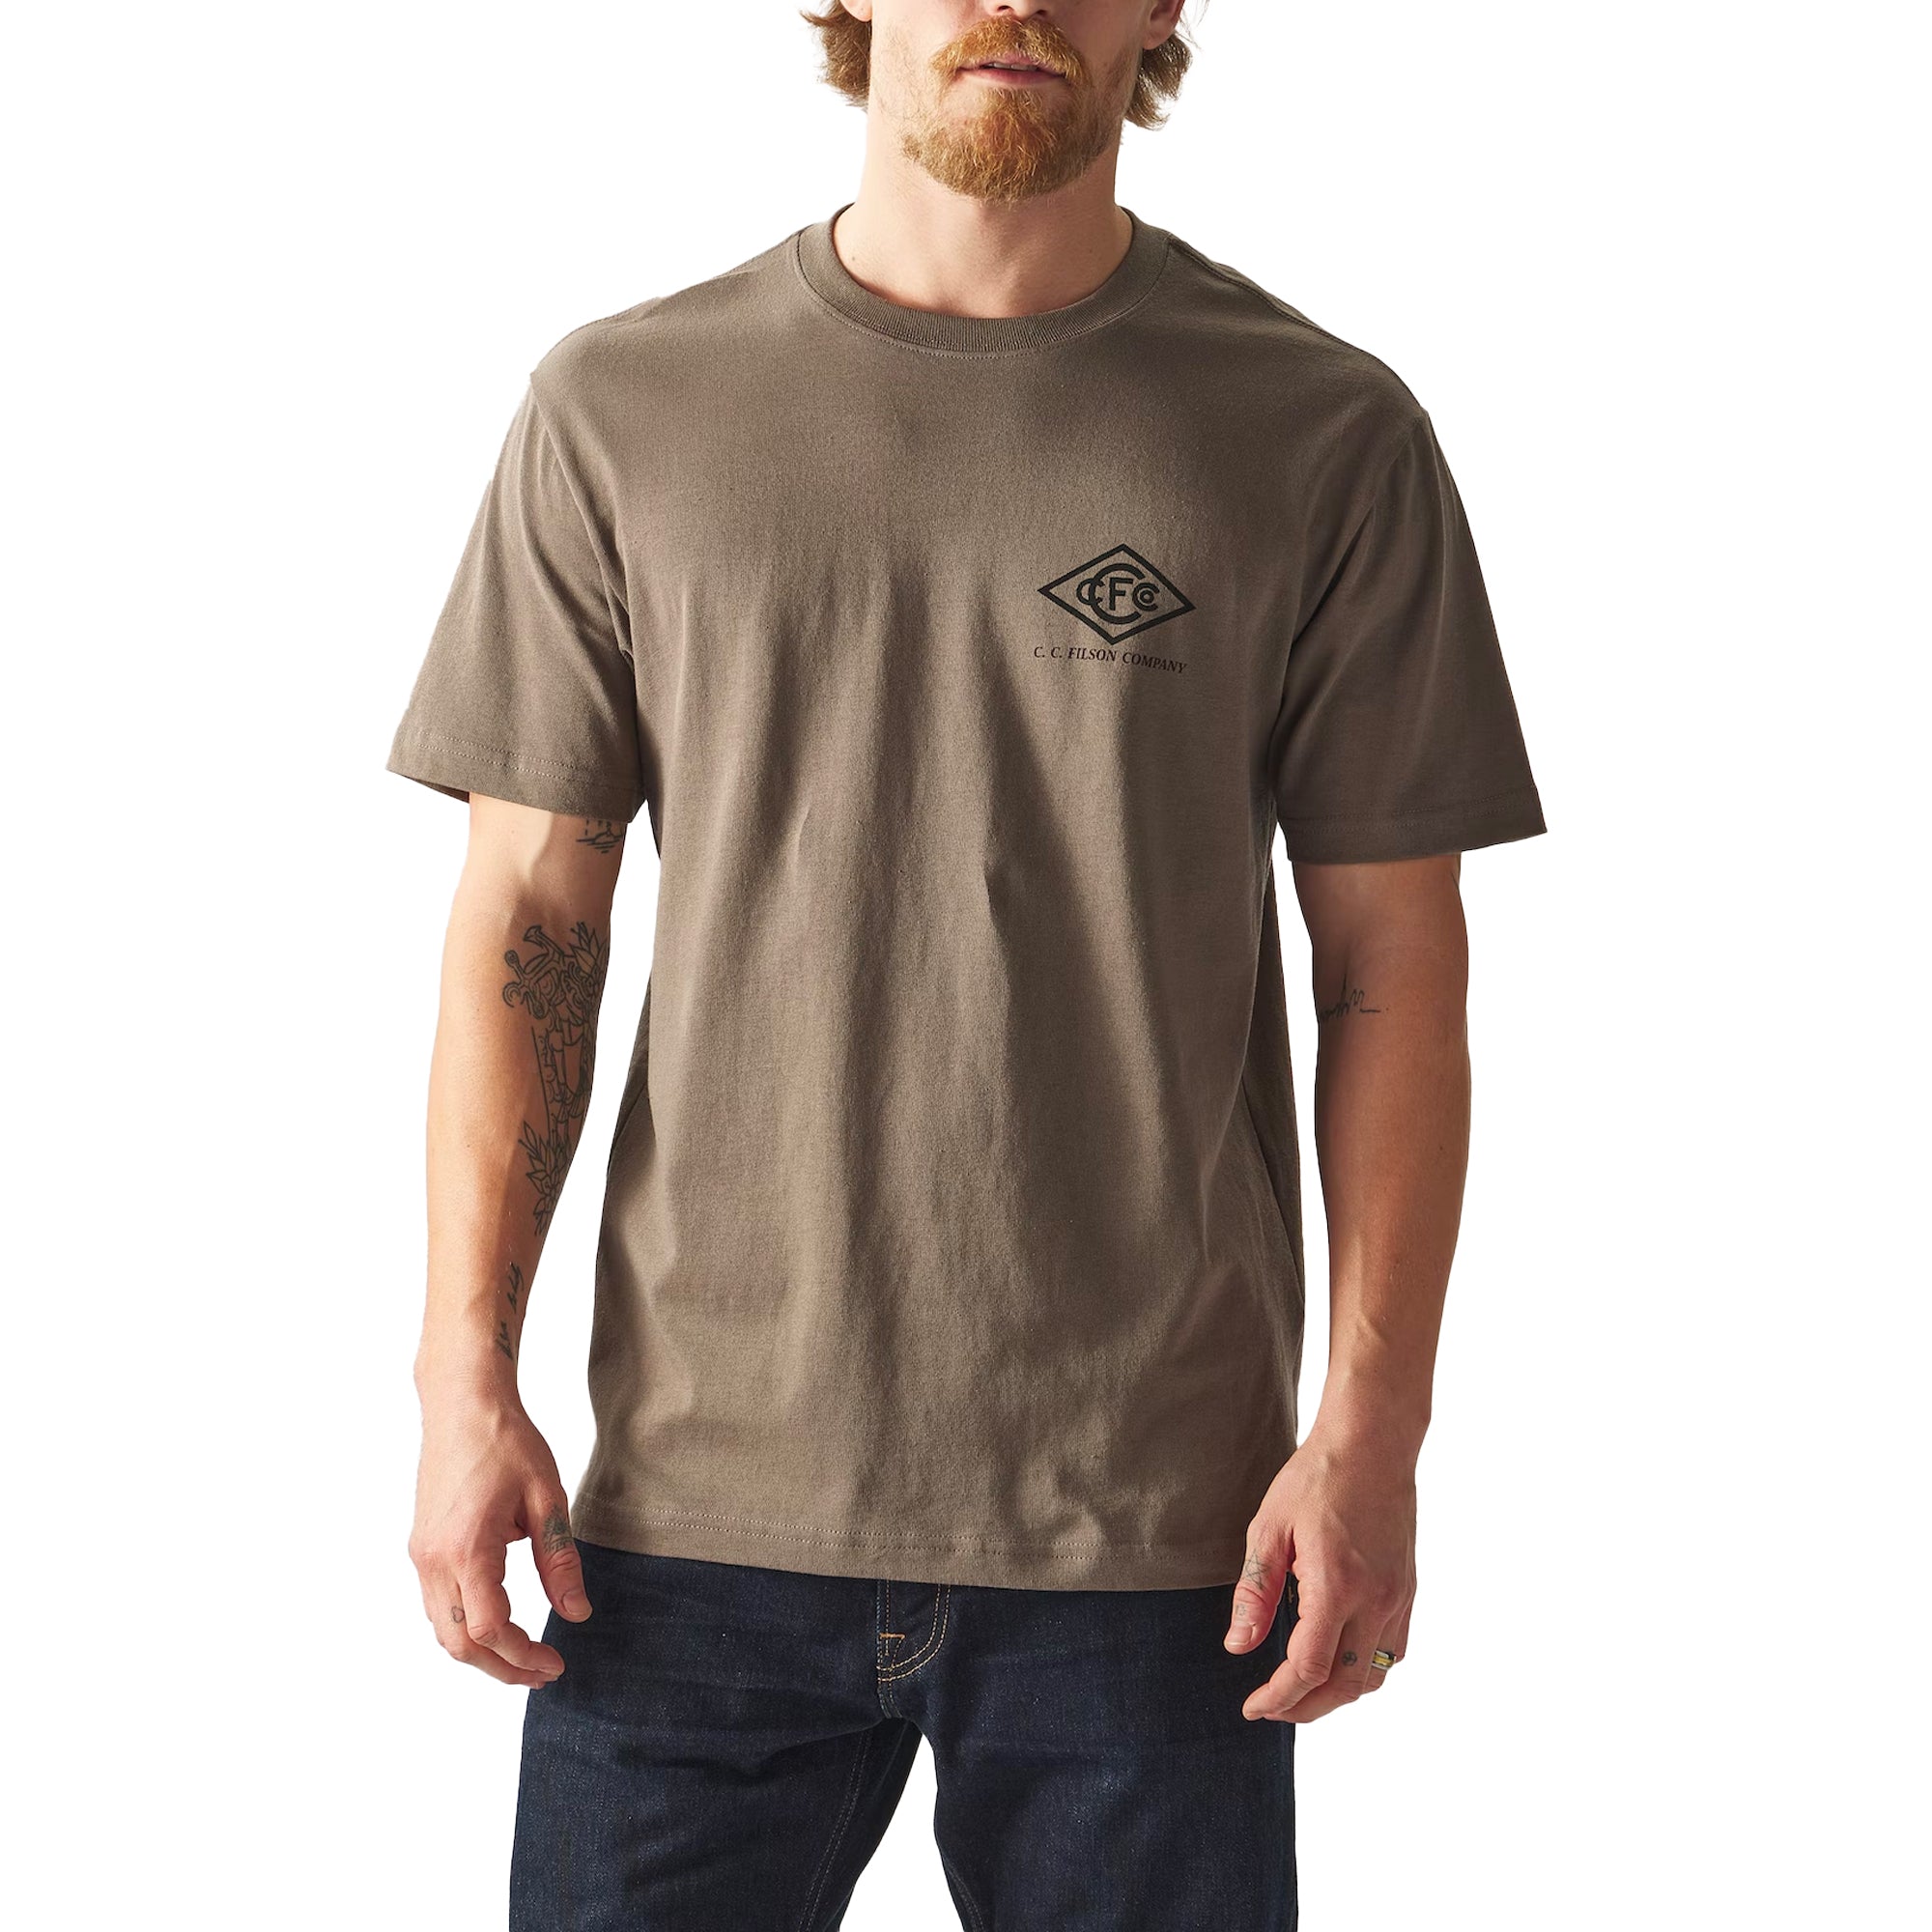 Filson SS Pioneer Graphic T-Shirt - Morel / Chainlink